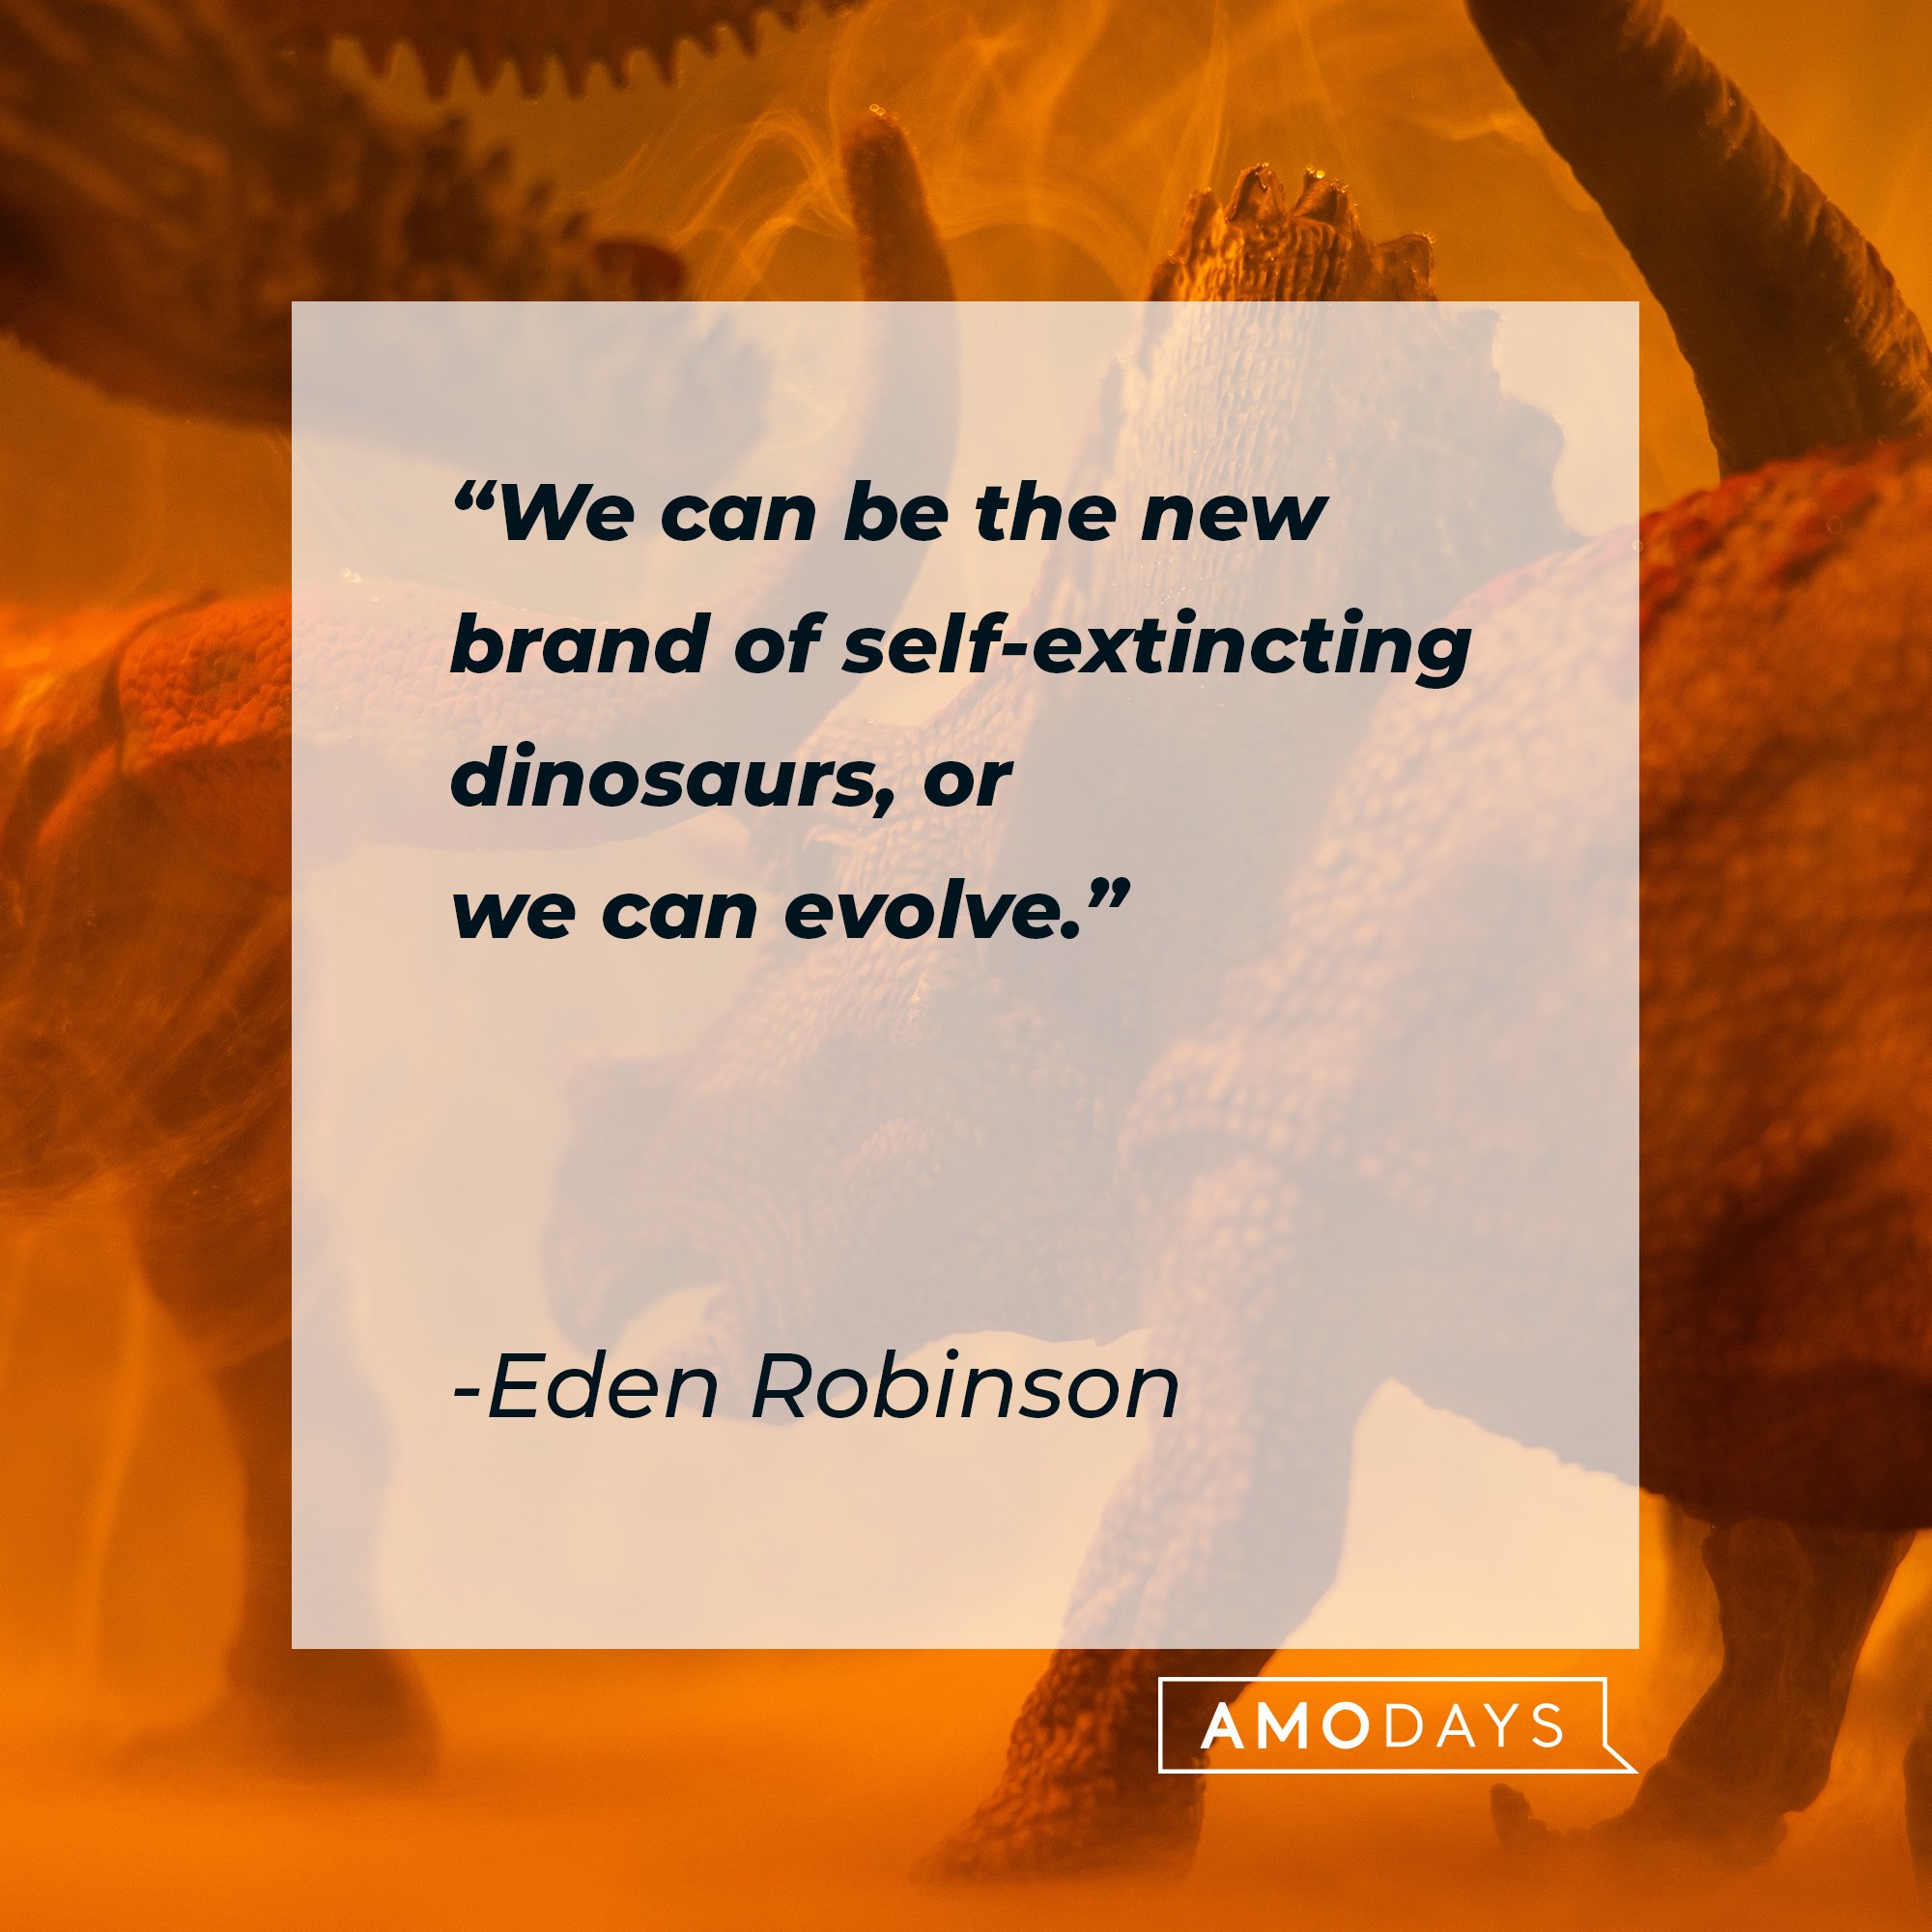 Eden Robinson’s quote: "We can be the new brand of self-extincting dinosaurs, or we can evolve." | Image: AmoDays